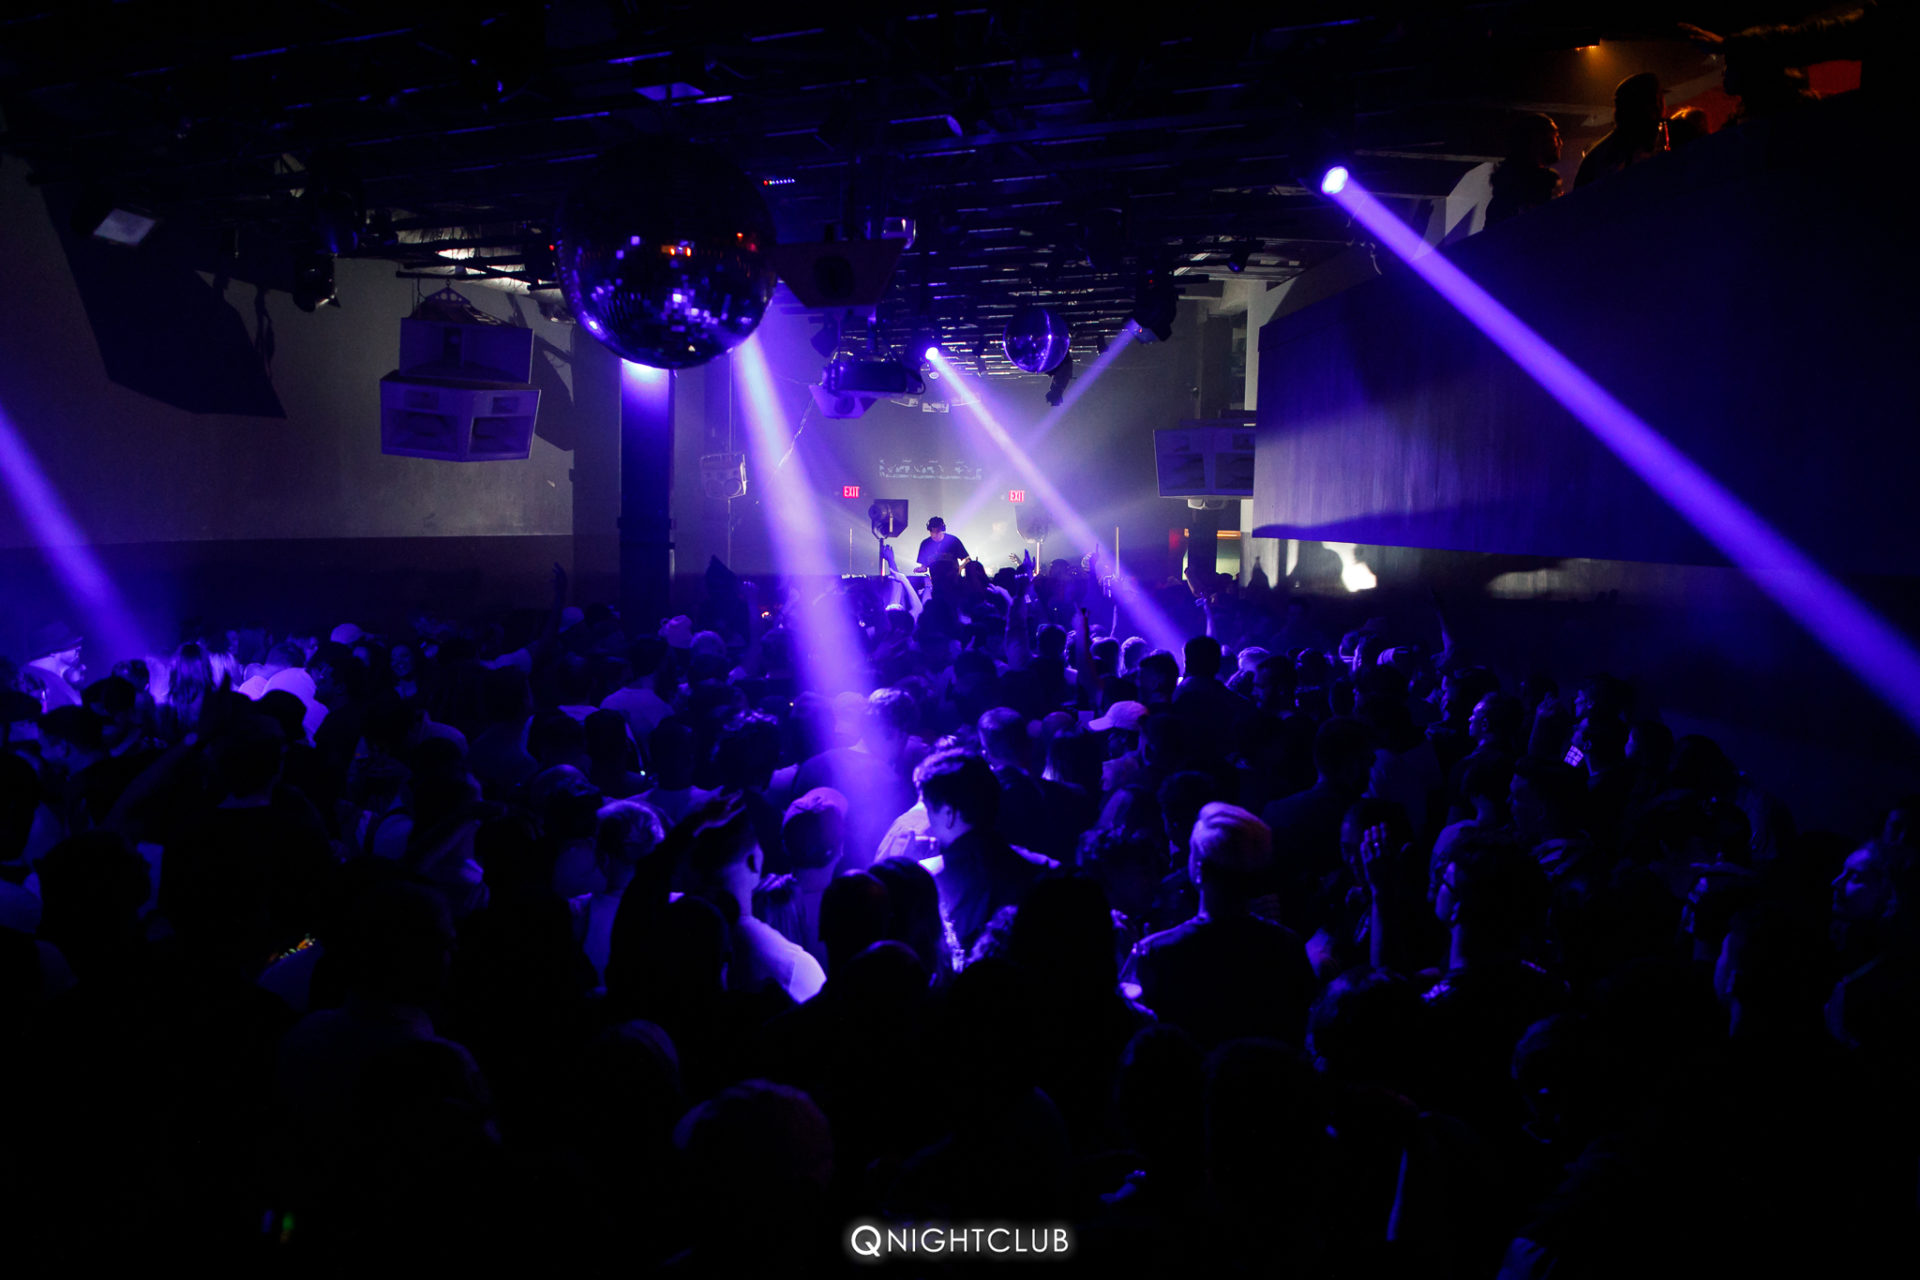 Mau P performing at Q Nightclub with purple lights from ceiling, back of the venue with crowd in front.